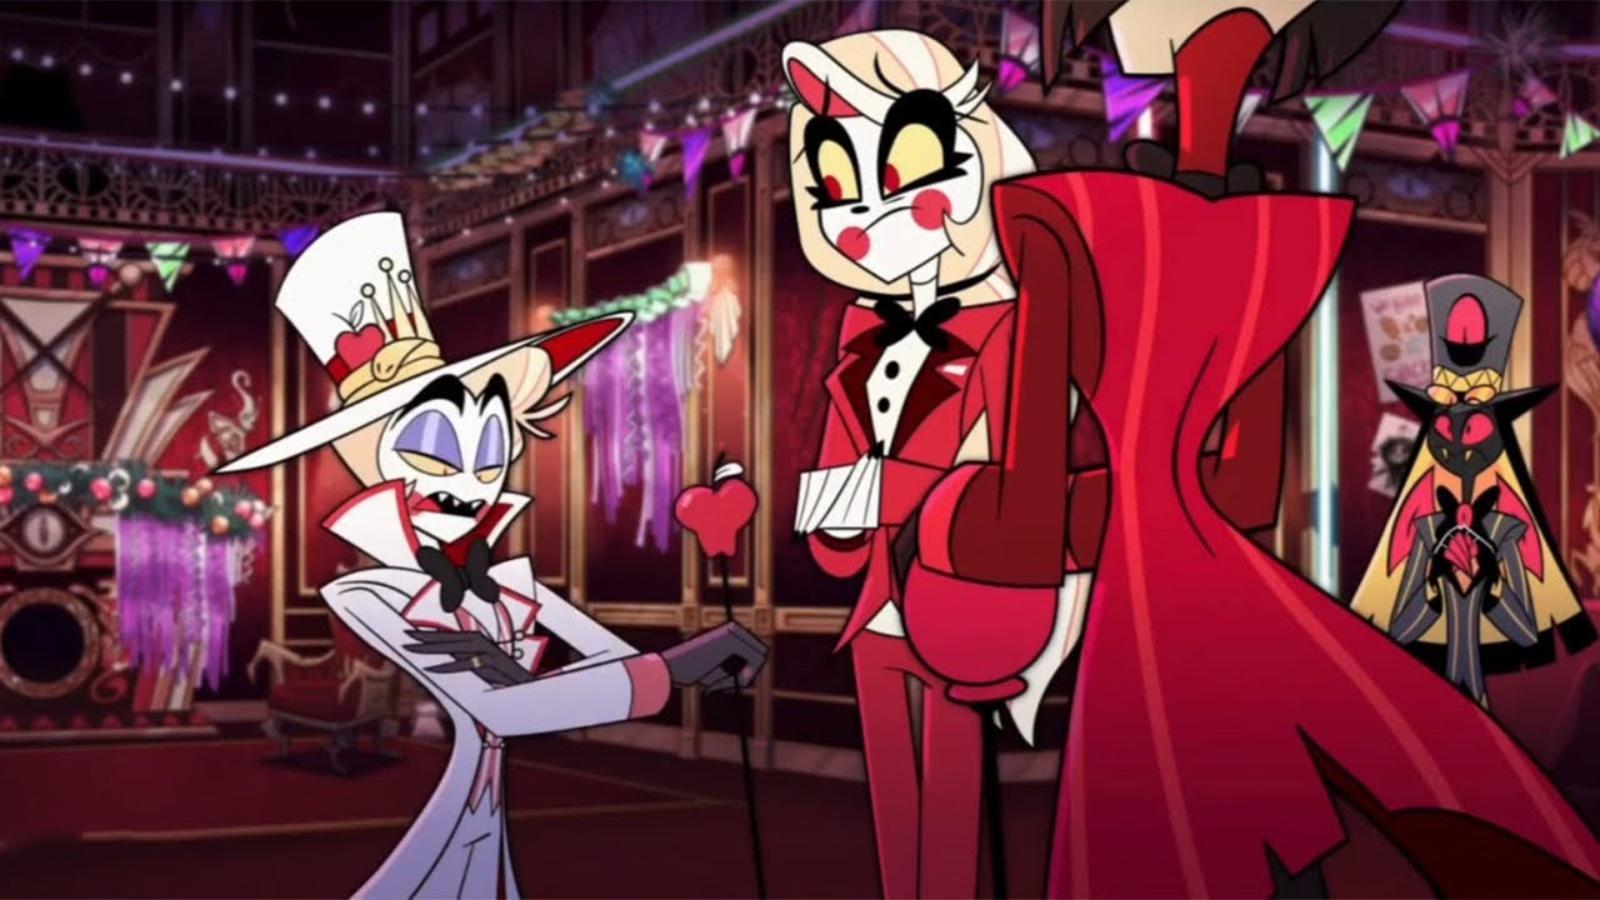 Prime Video Orders 'Hazbin Hotel,' New Adult Animated Series From A24